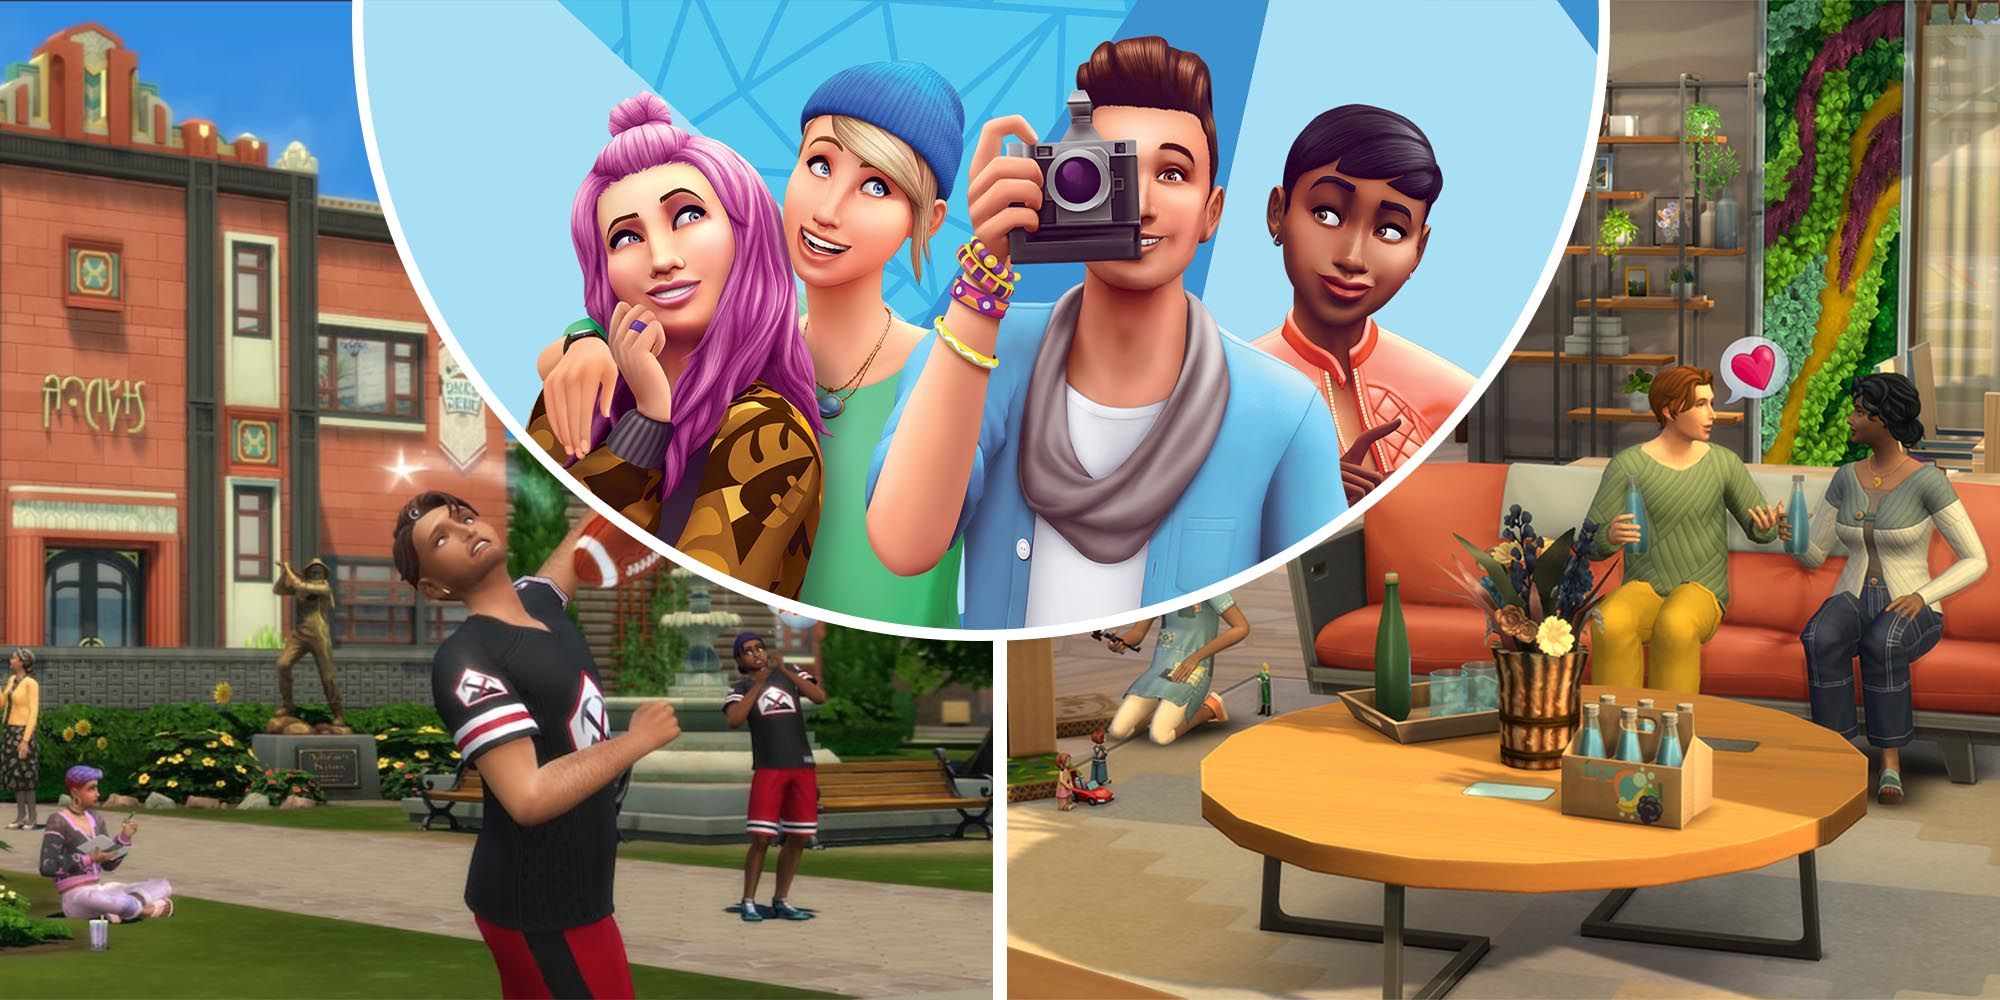 The Sims 4 Had Over 1.4 Billion Hours Played In 2022, According To EA